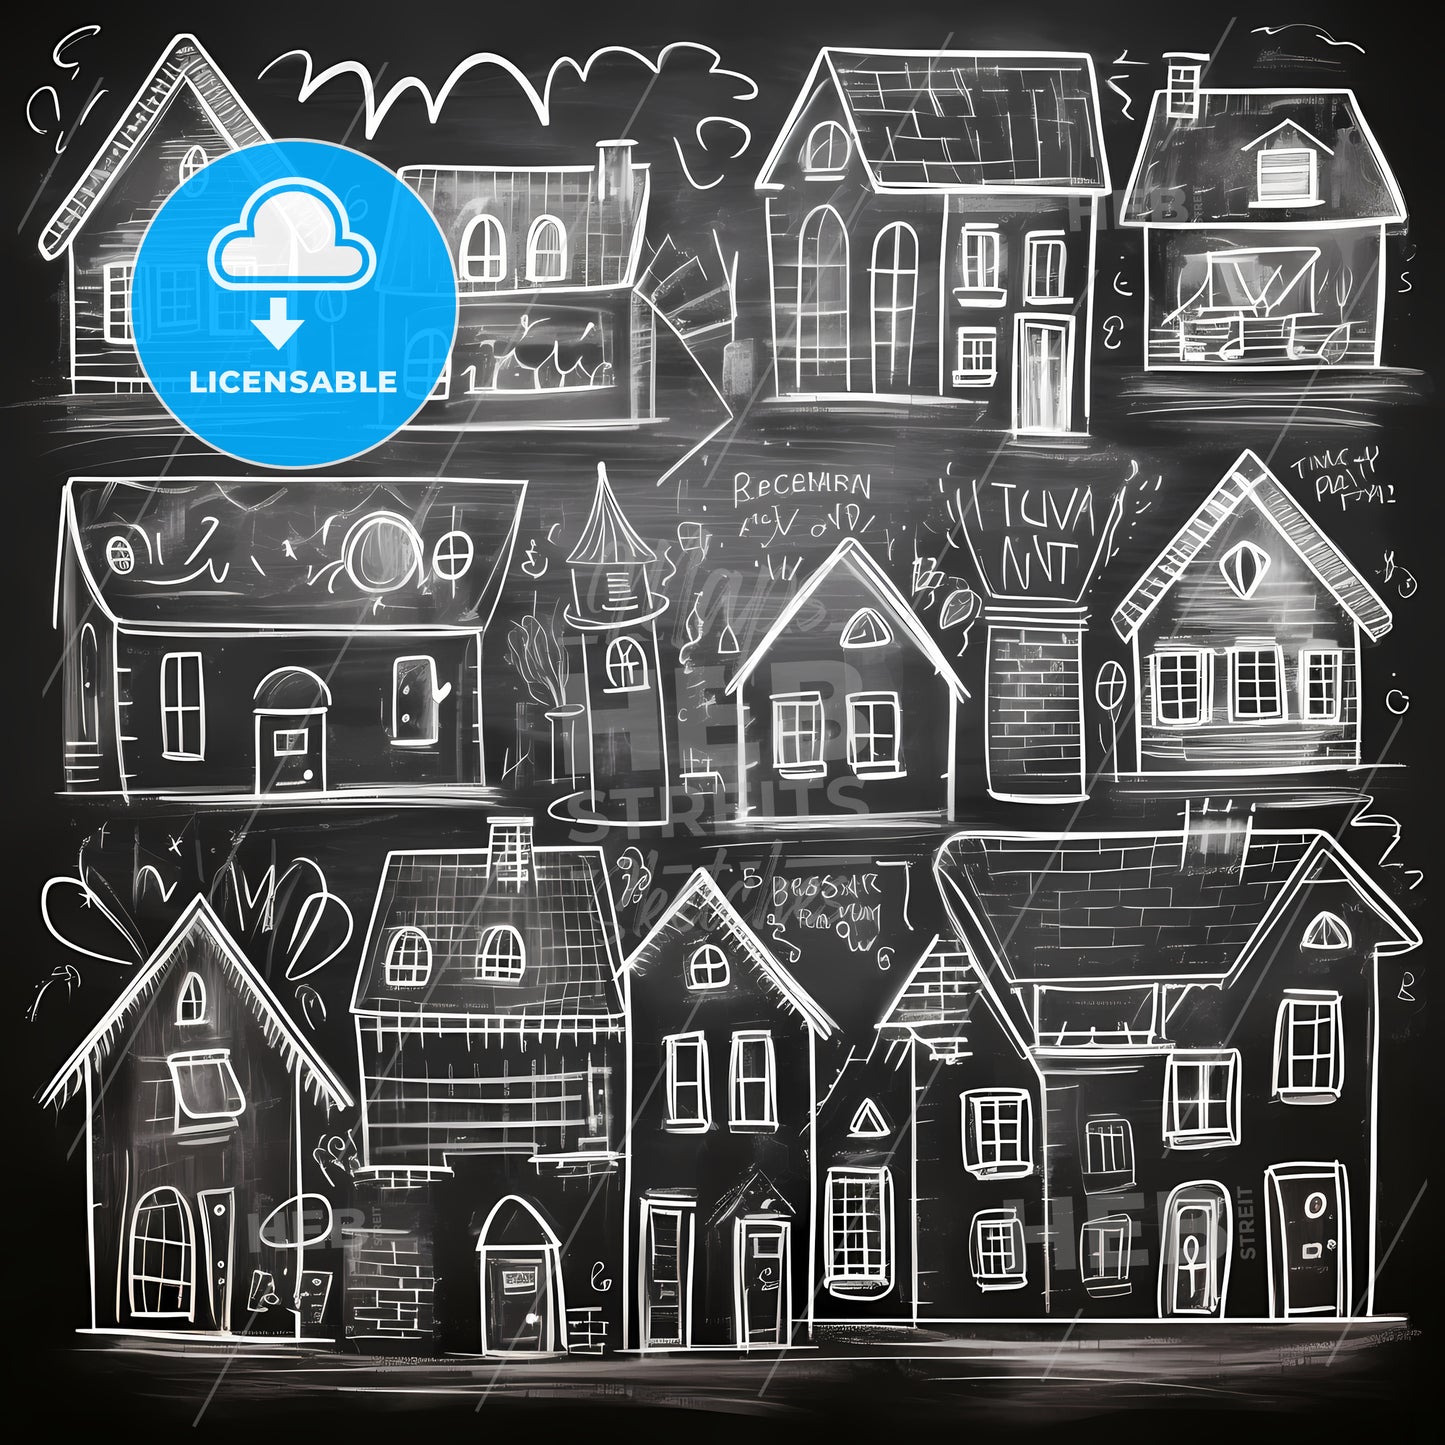 Group Of Houses Drawn On A Chalkboard